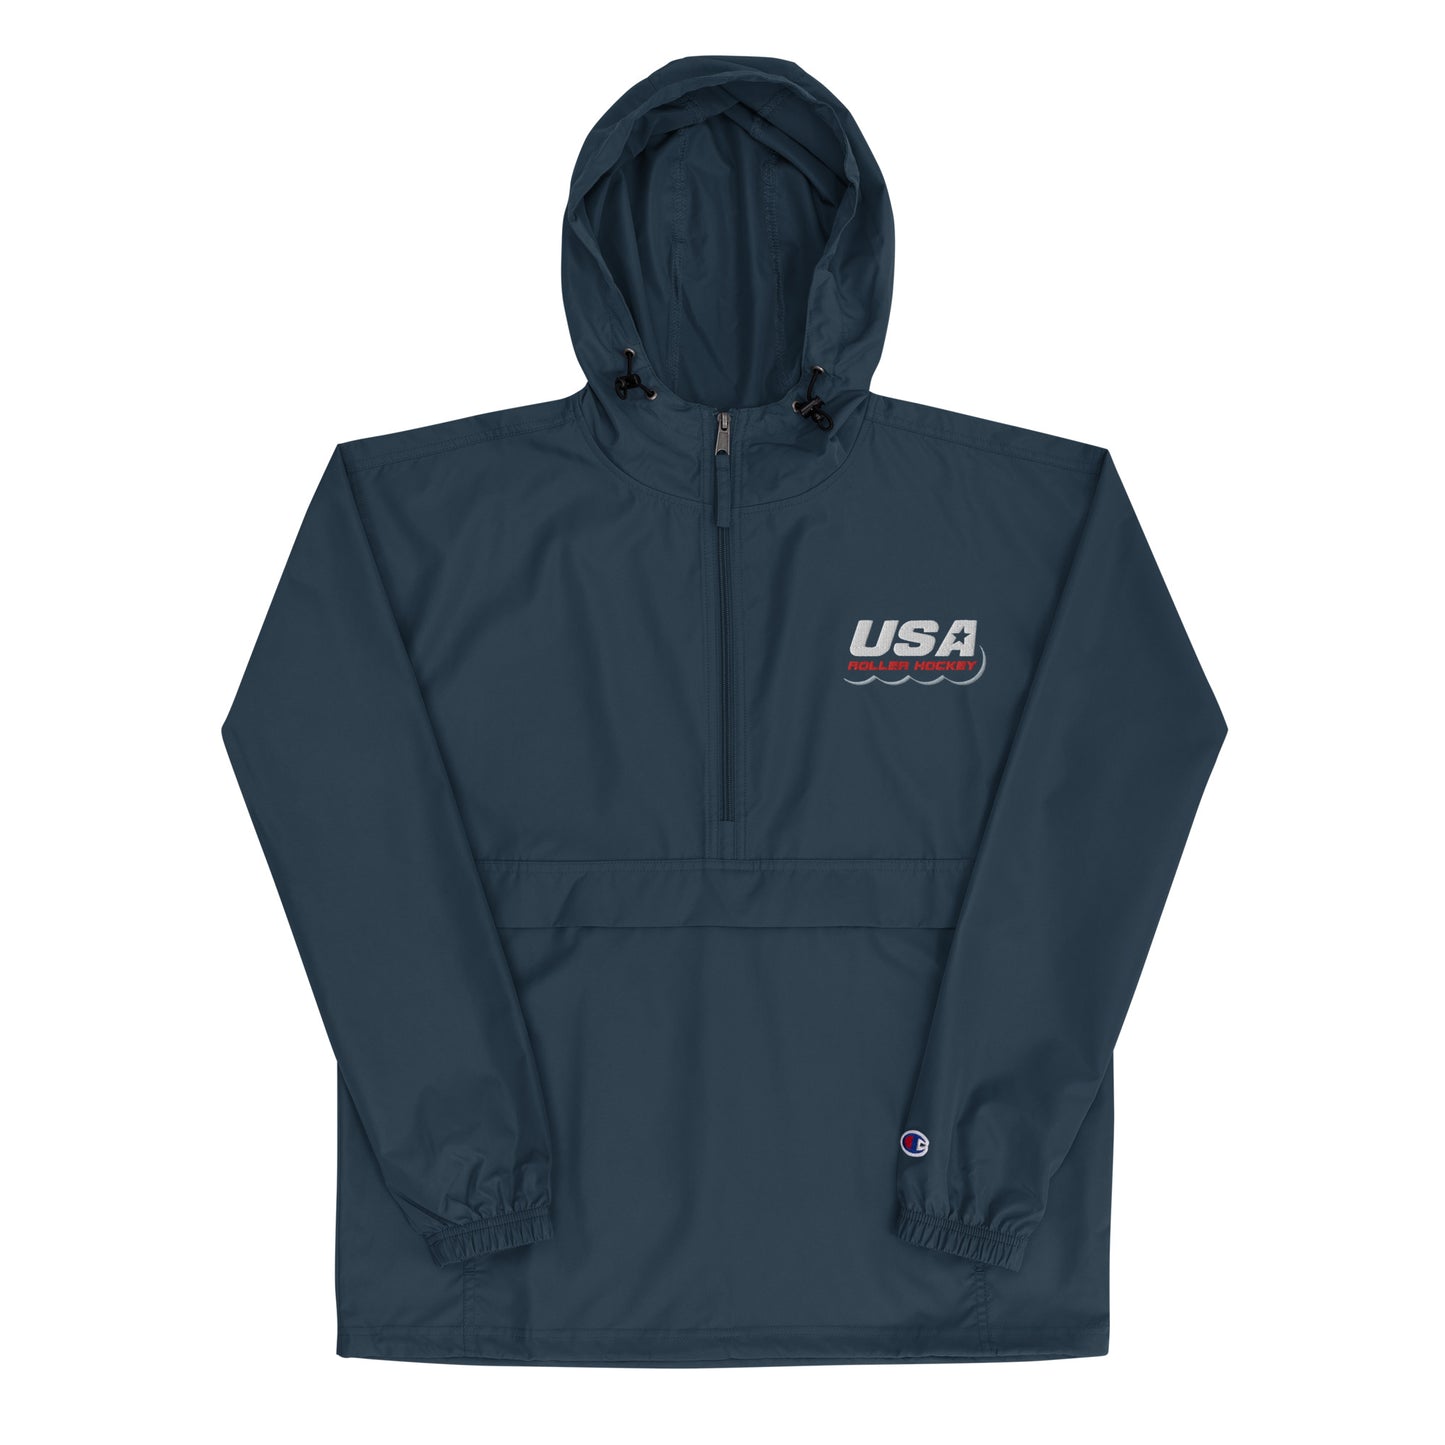 USARH Champion Packable Jacket